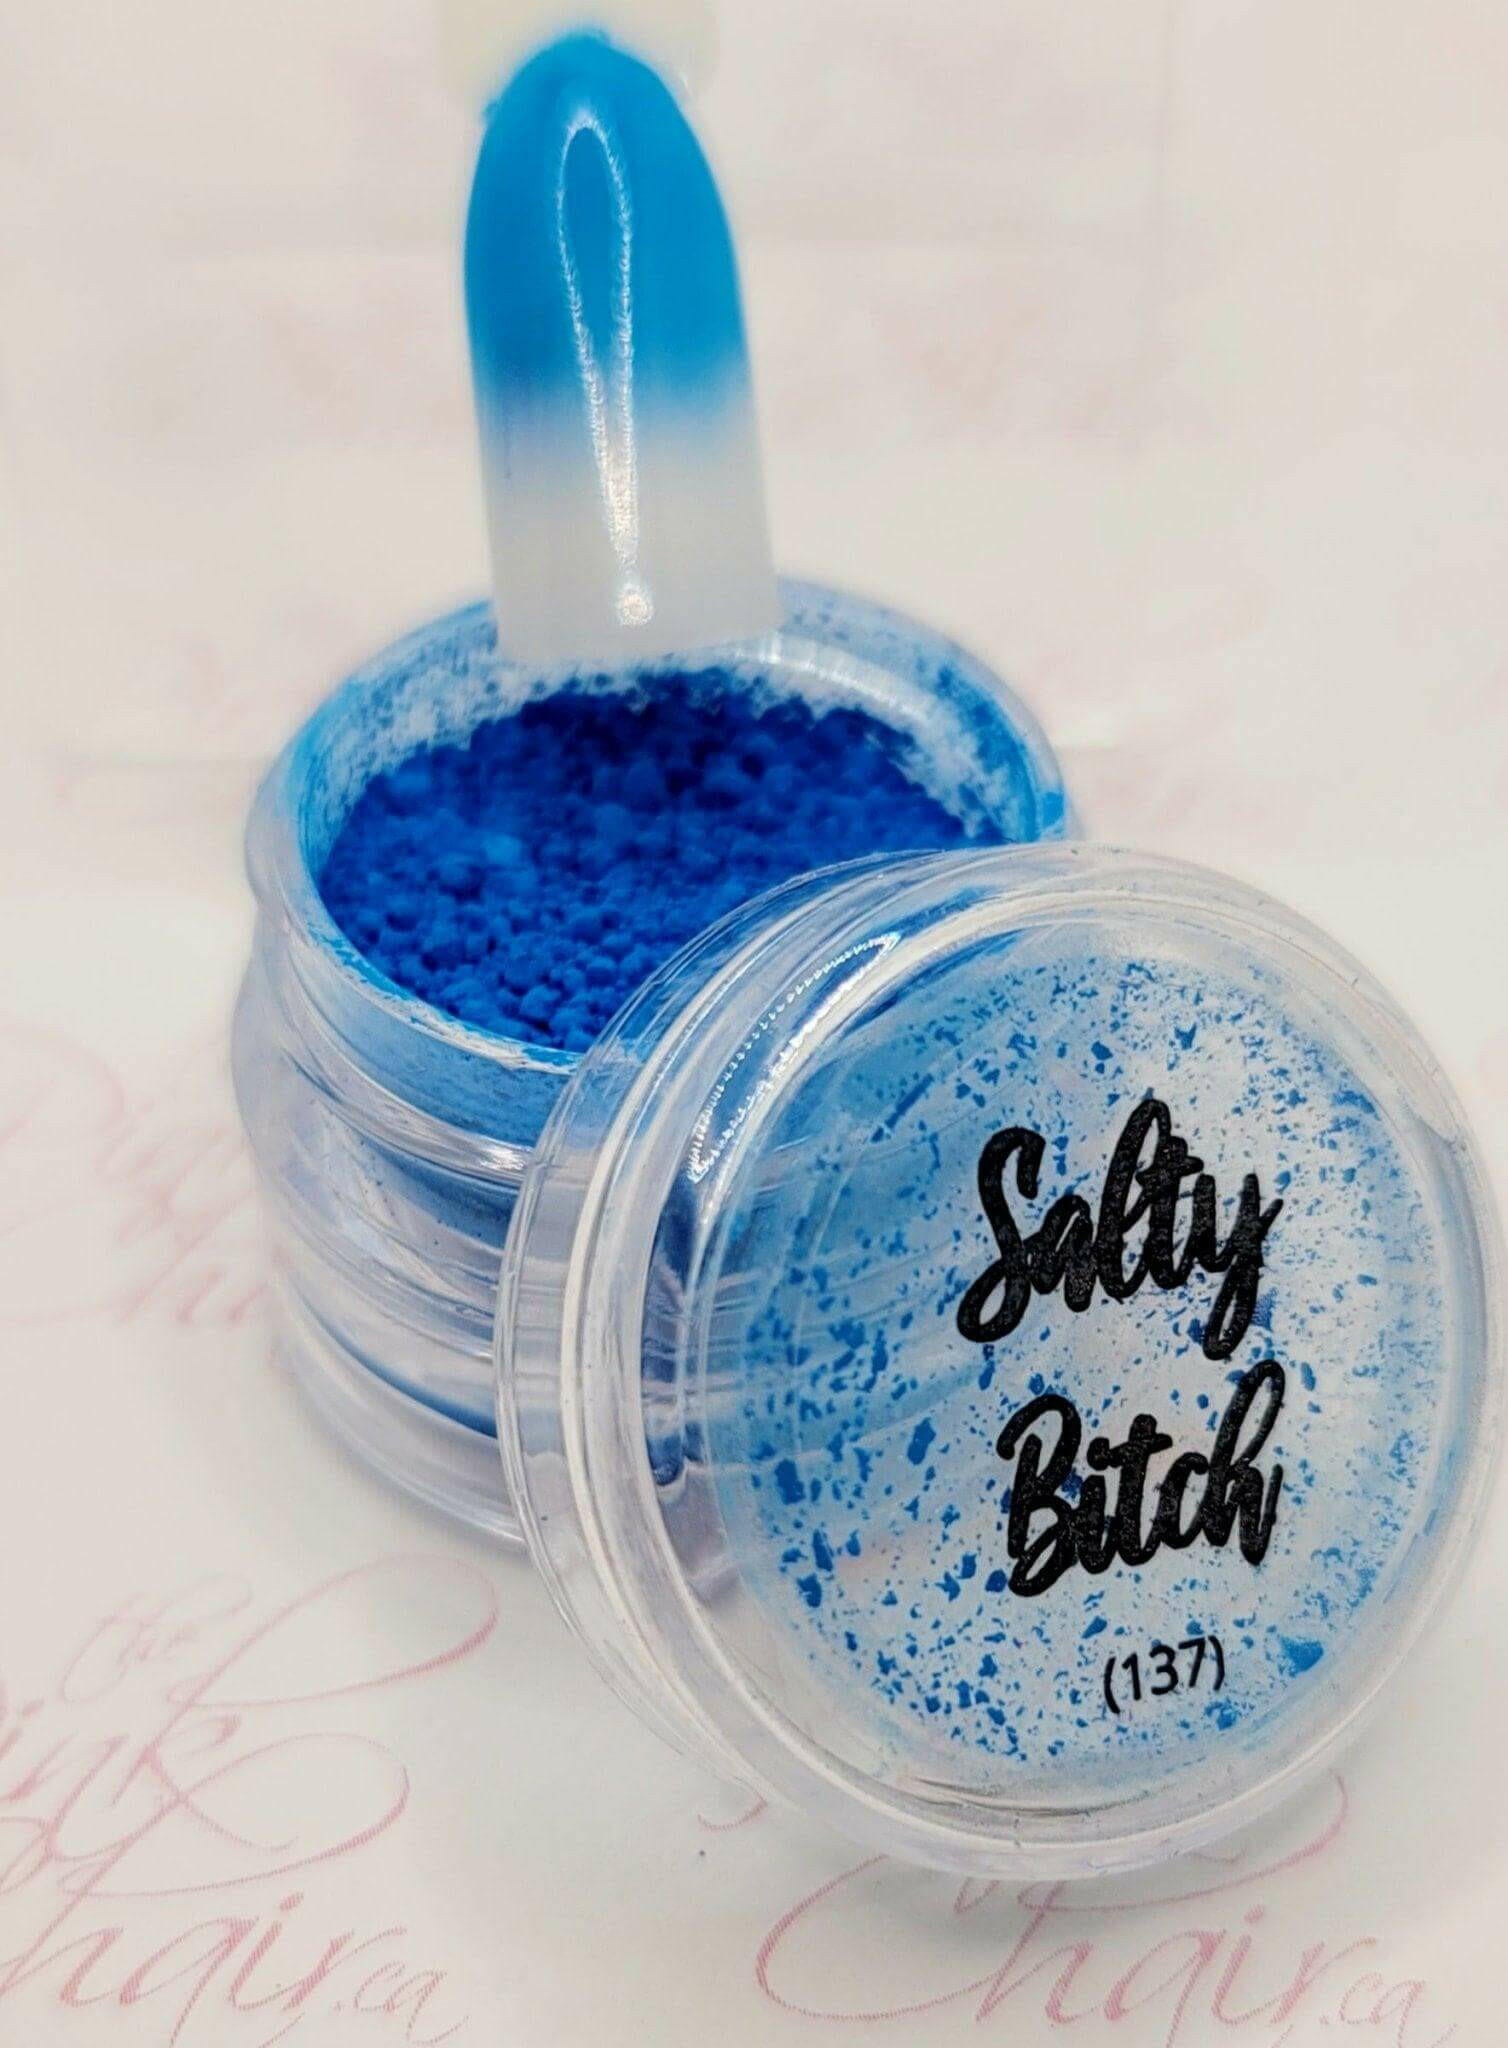 Salty Bitch, Pigment by thePINKchair - thePINKchair.ca - Nail Art - thePINKchair nail studio